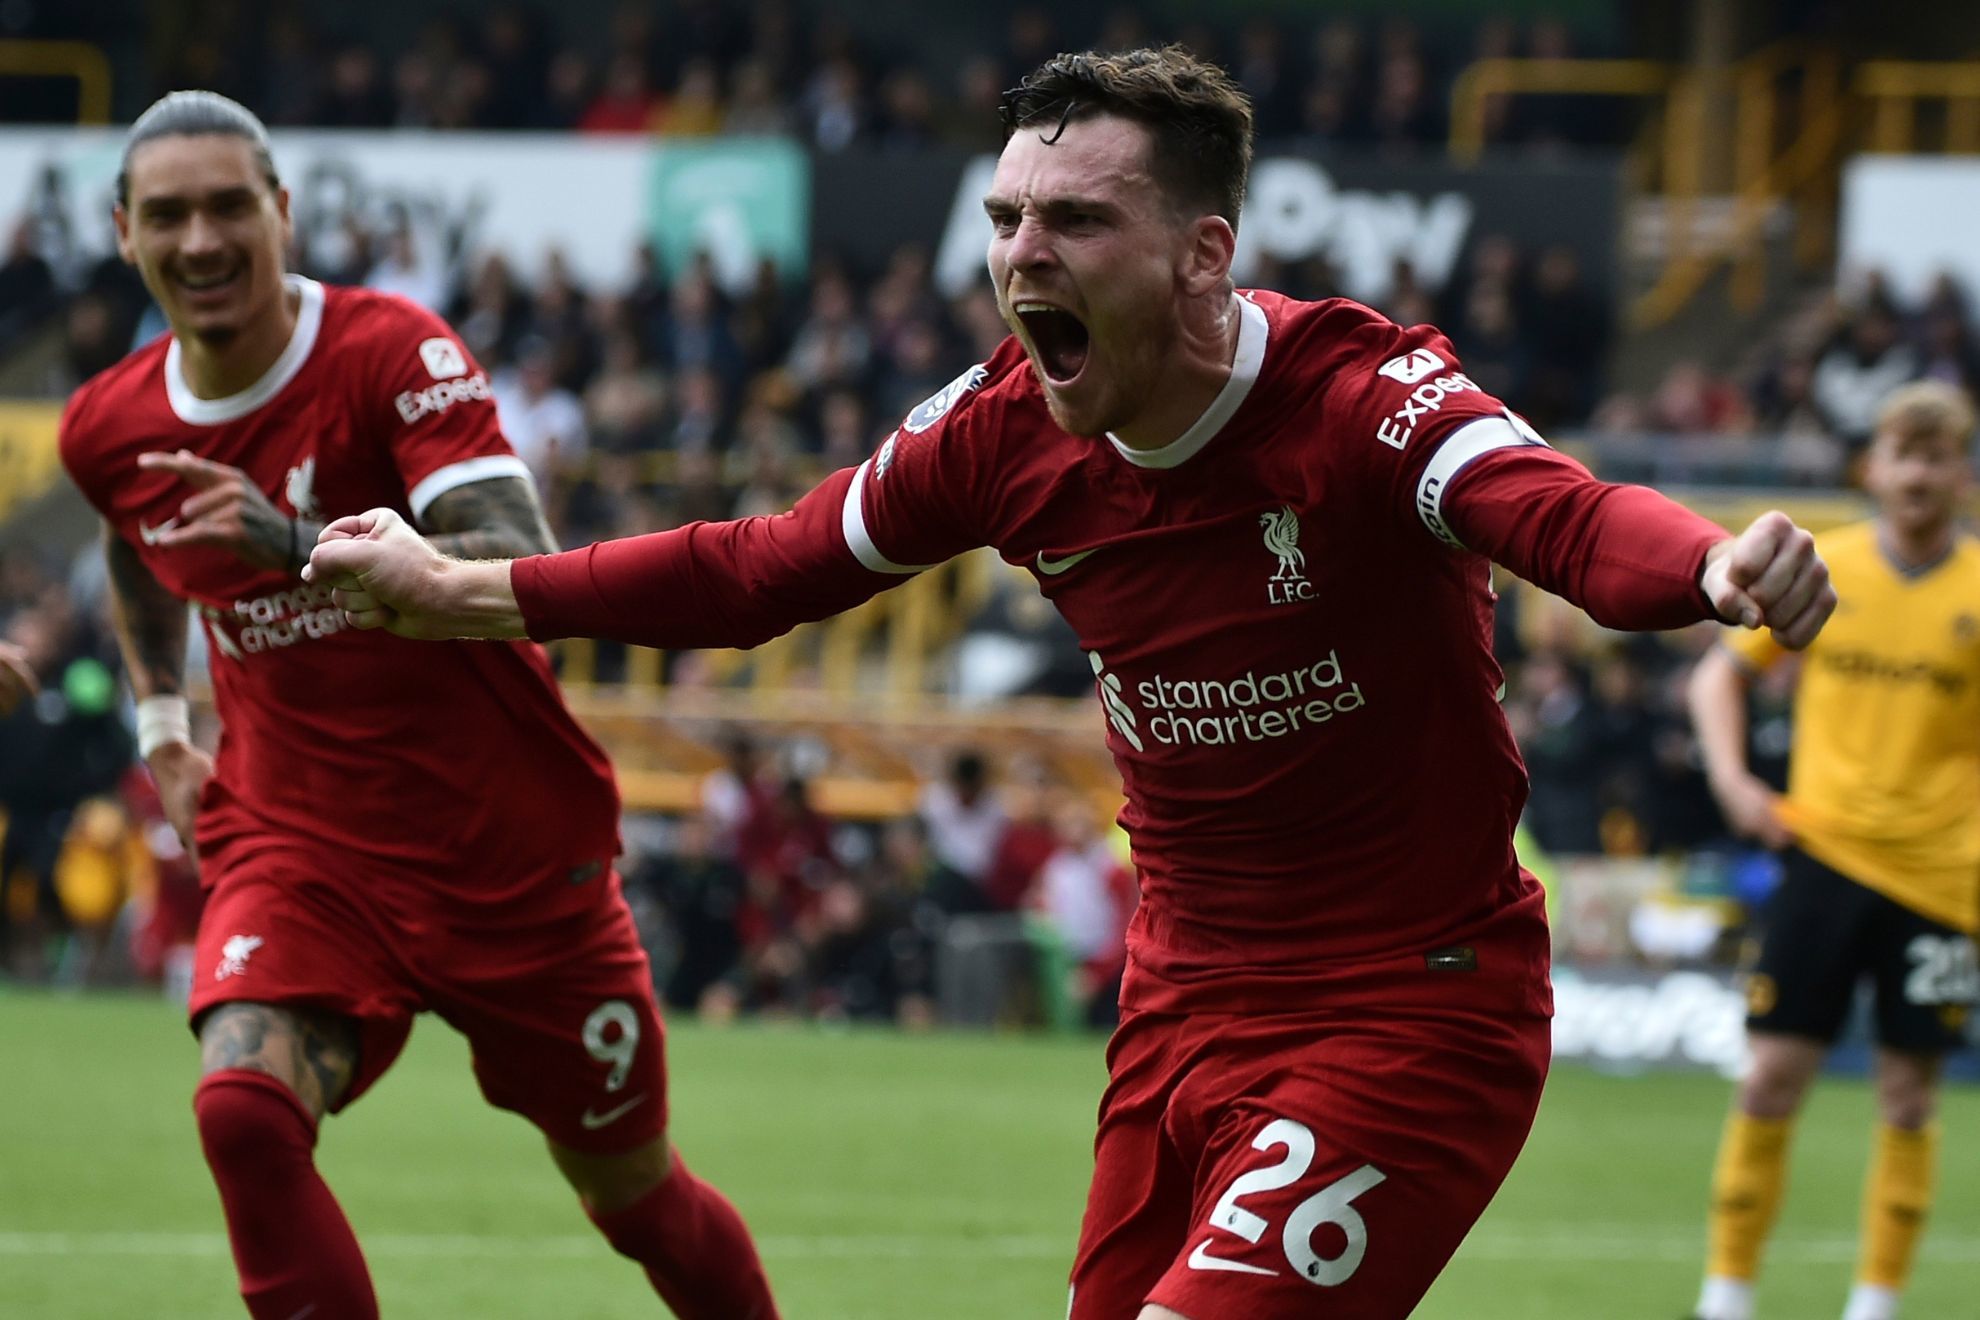 Liverpool's Andrew Robertson celebrates after scoring his side's second goal against Wolverhampton